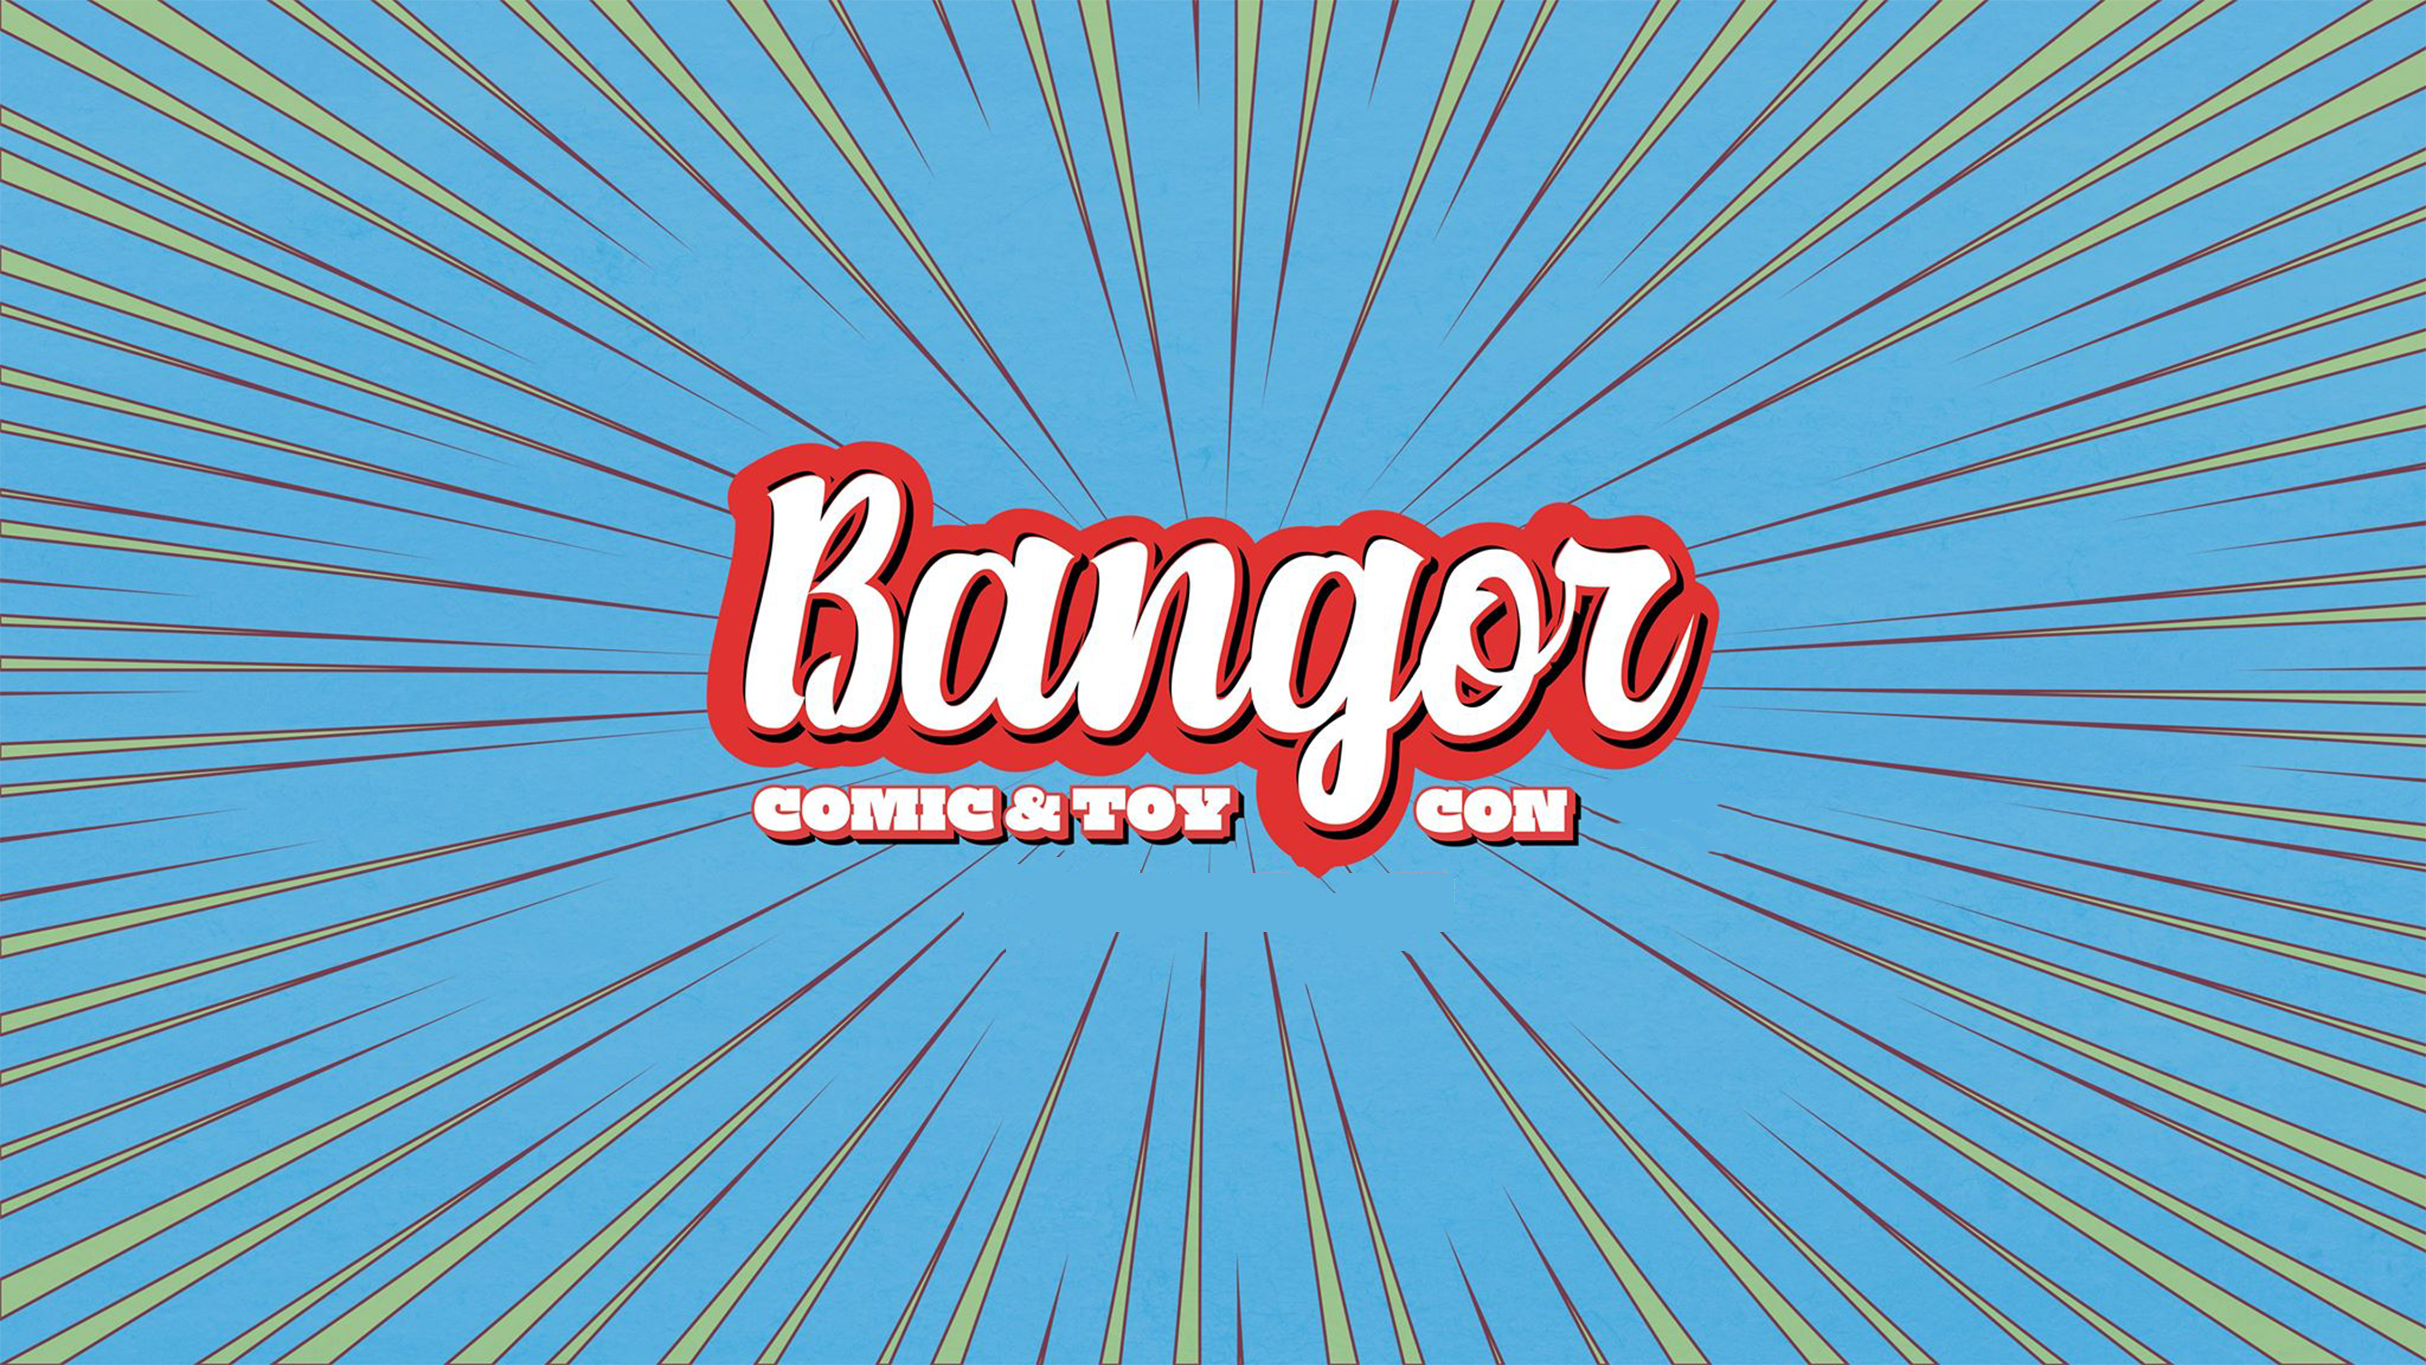 Bangor Comic and Toy Con - Sunday (10:00 AM - 5:00 PM)